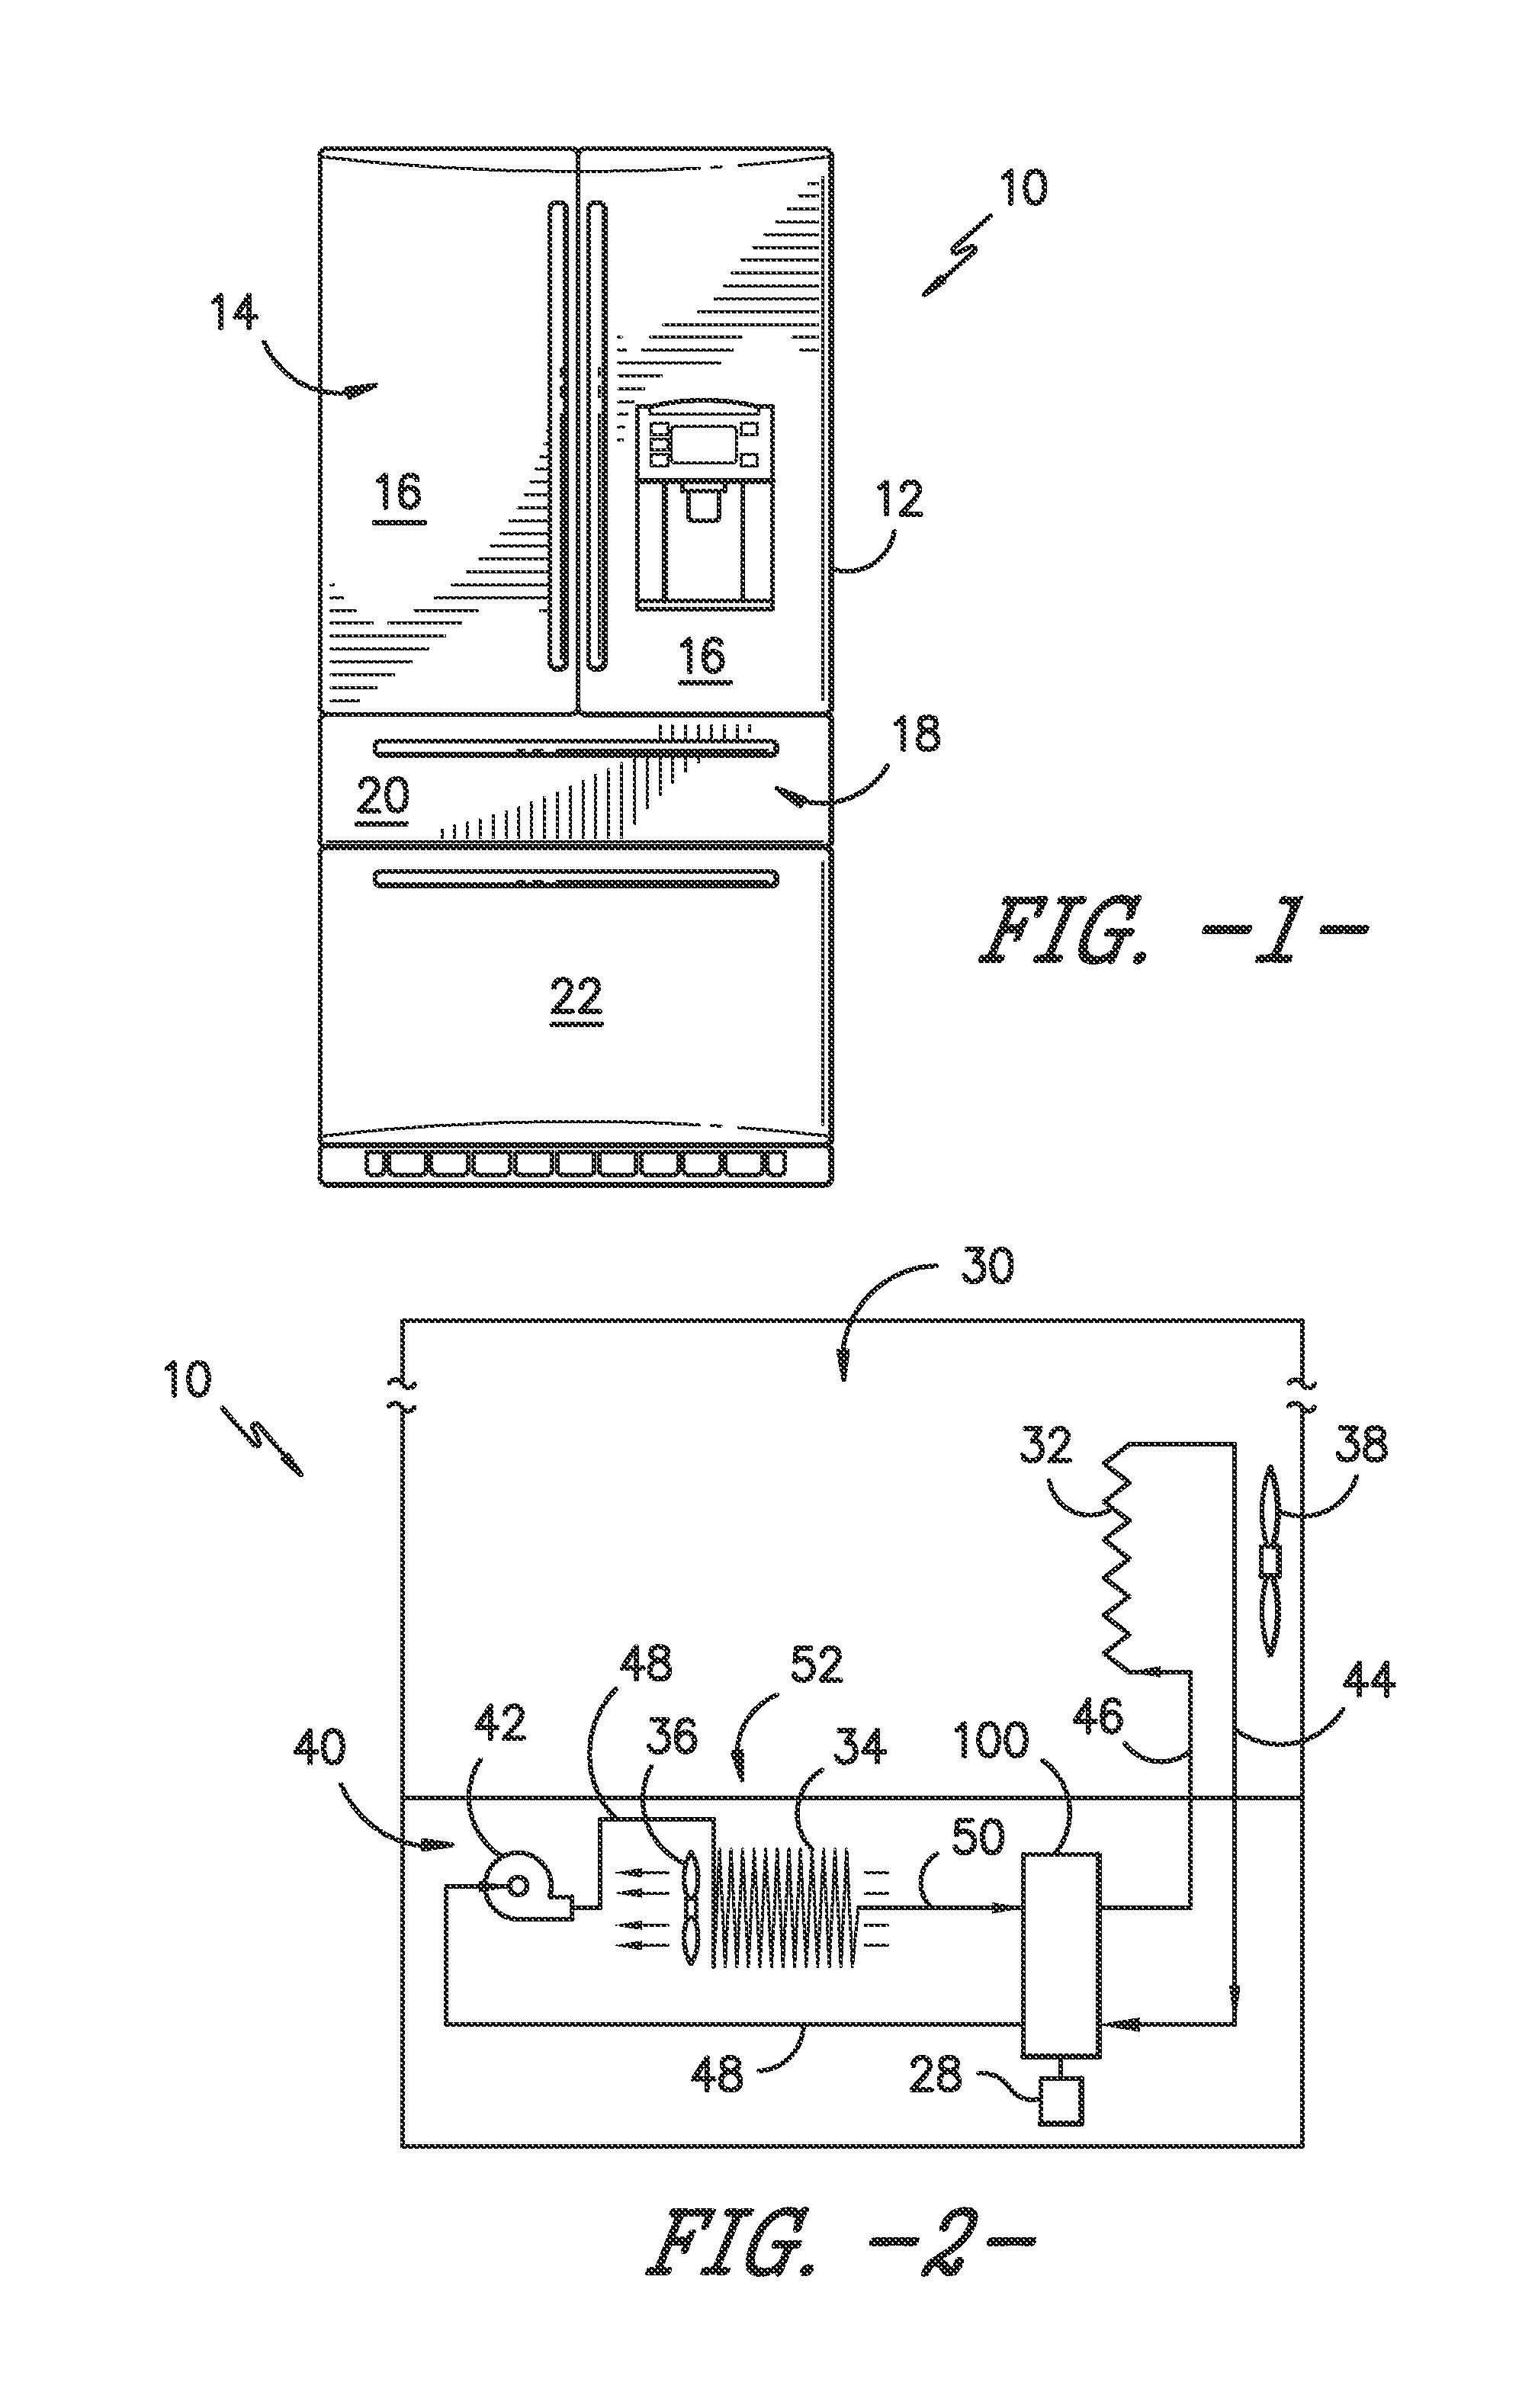 Regenerator including magneto caloric material with channels for the flow of heat transfer fluid